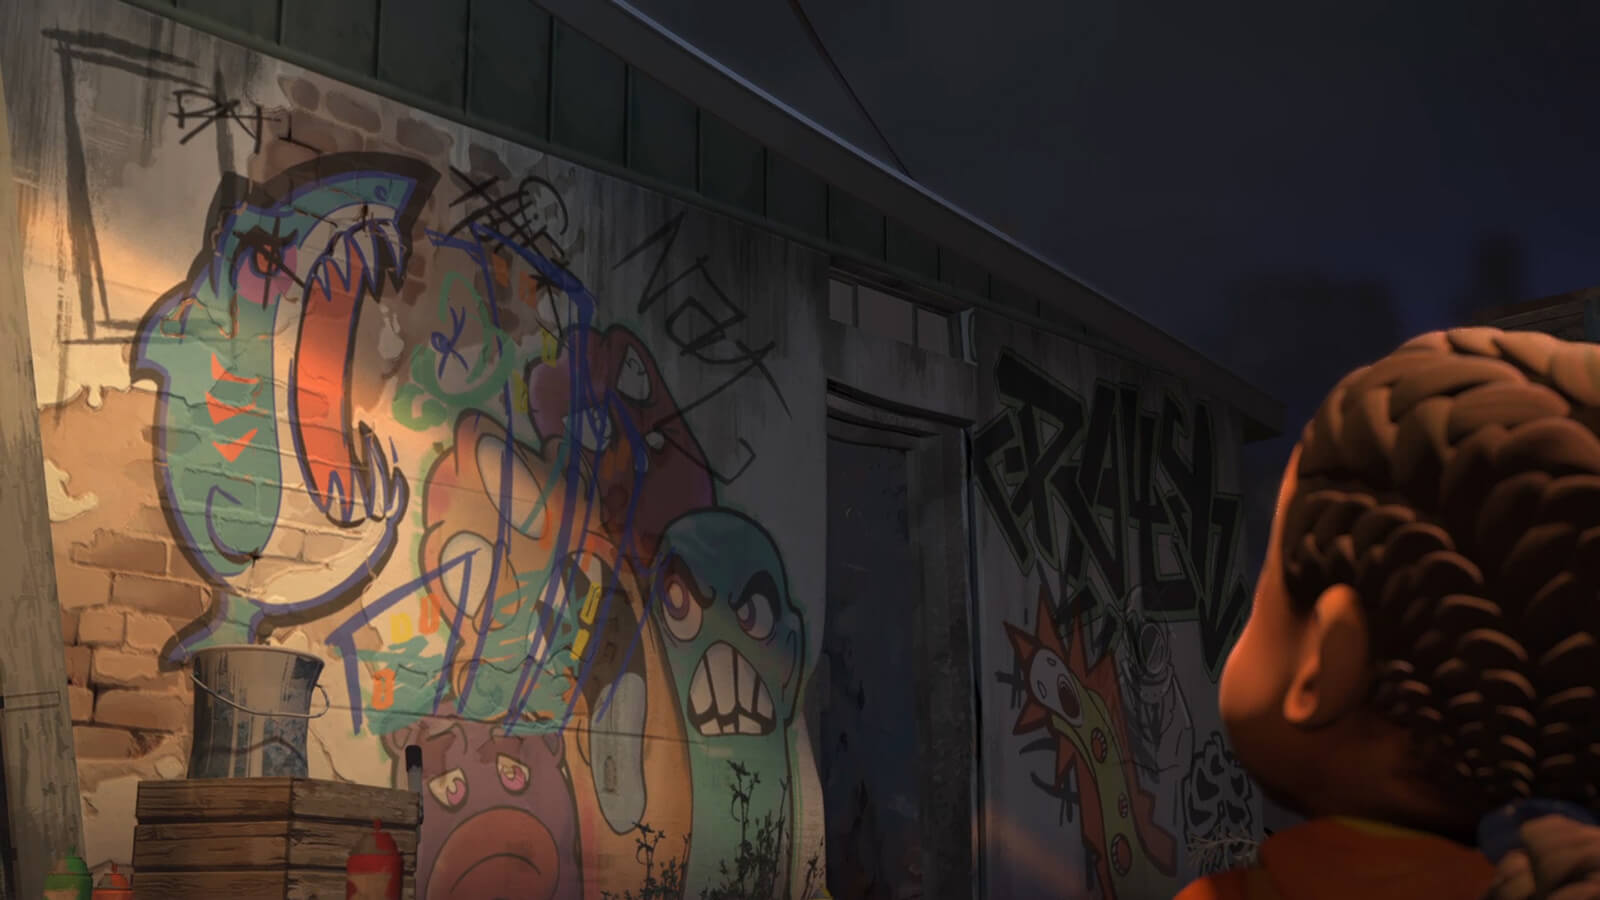 A young girl from behind looking at a dimly lit exterior wall covered in colorful graffiti